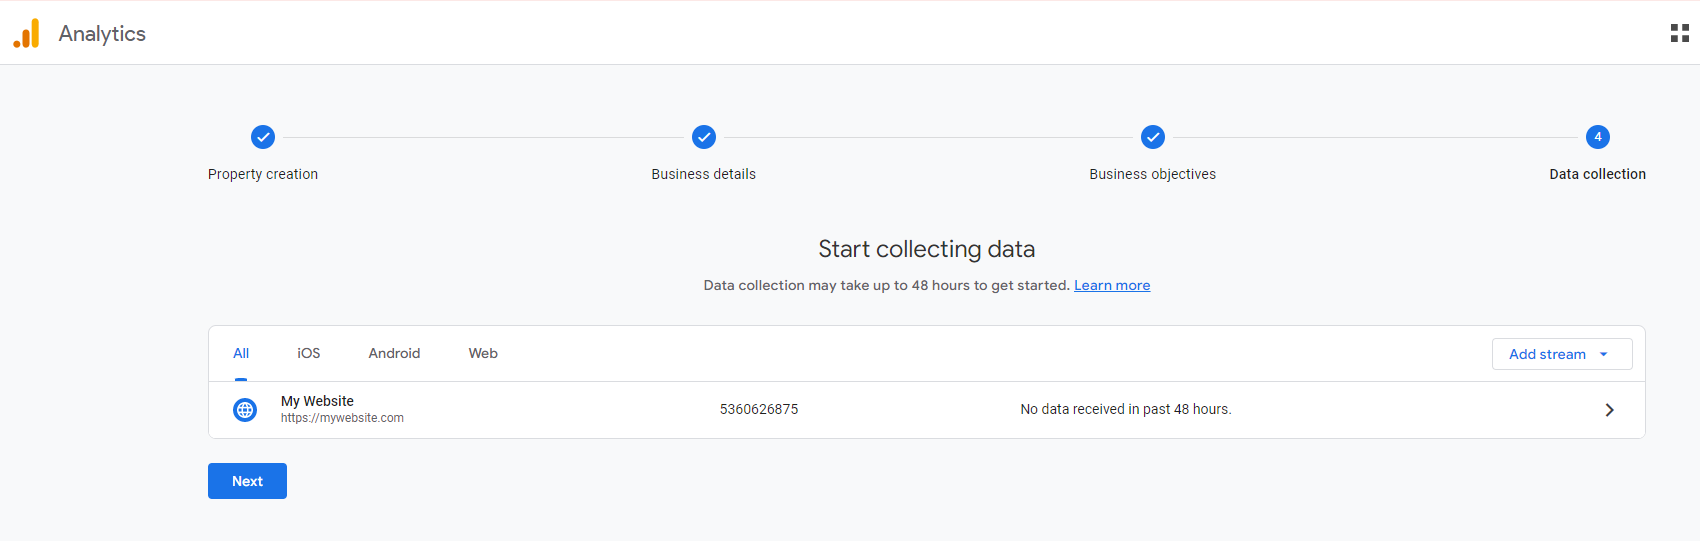 Google Analytics Interface for Starting to Collect Data With 'My Website' Present